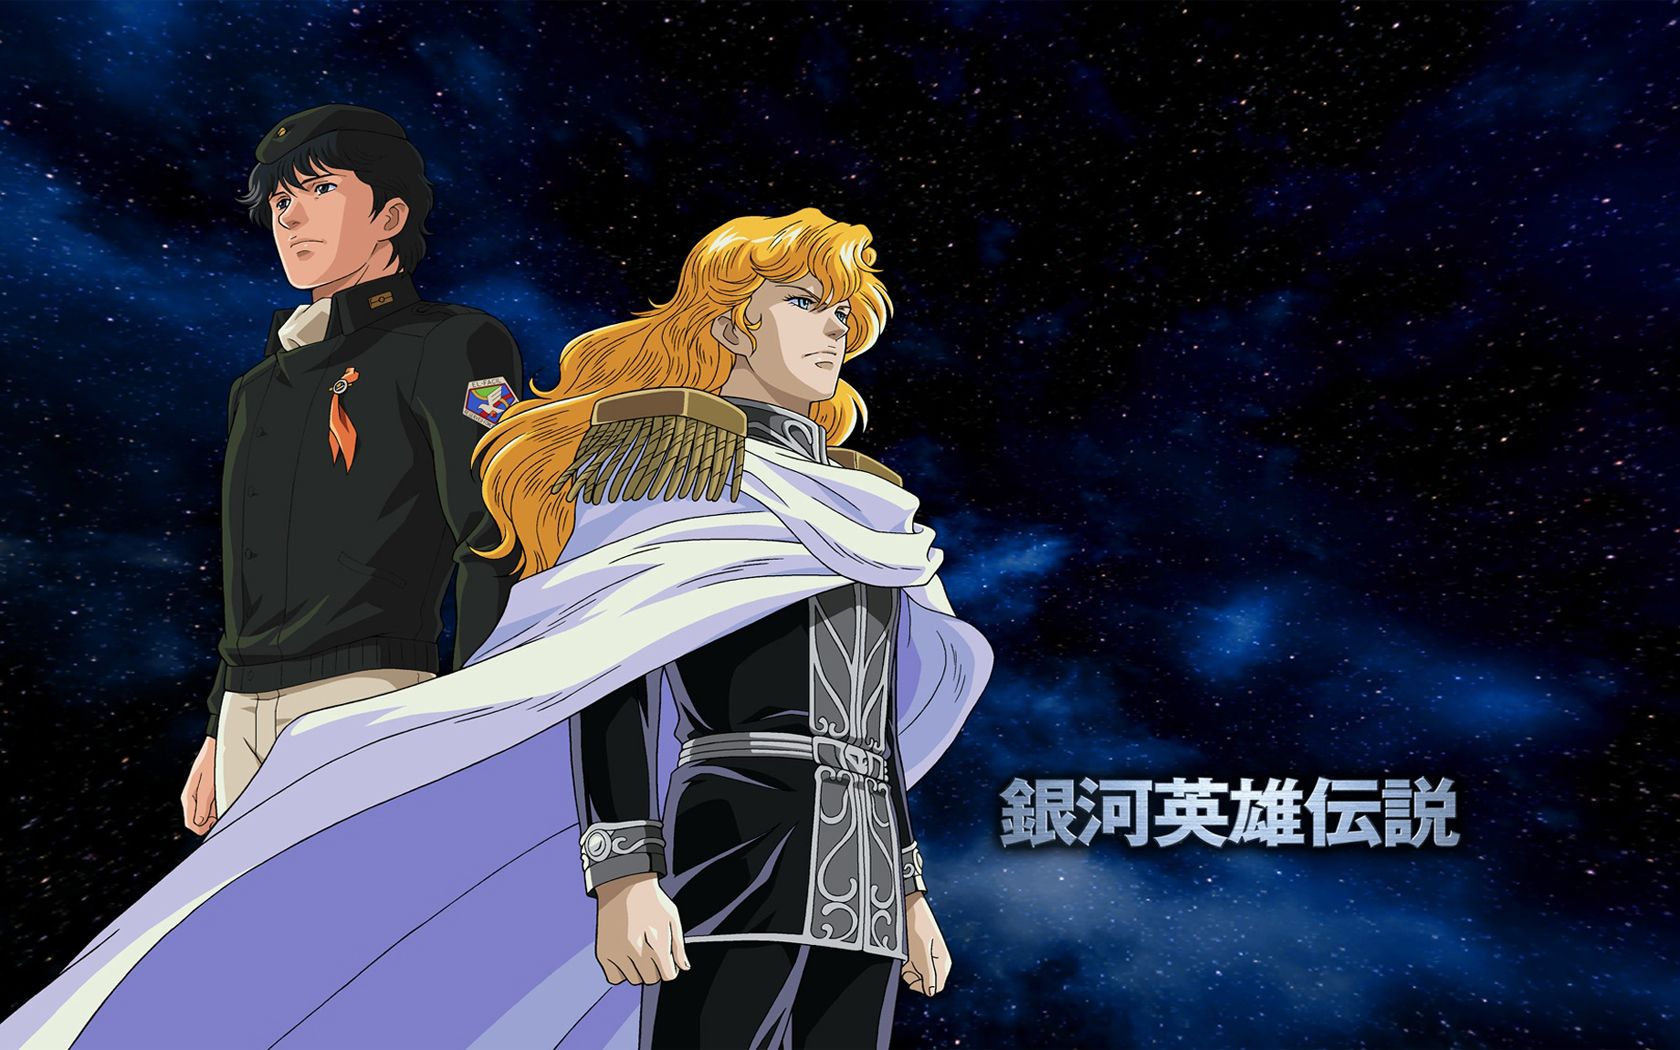 Legend Of The Galactic Heroes Wallpapers Wallpaper Cave